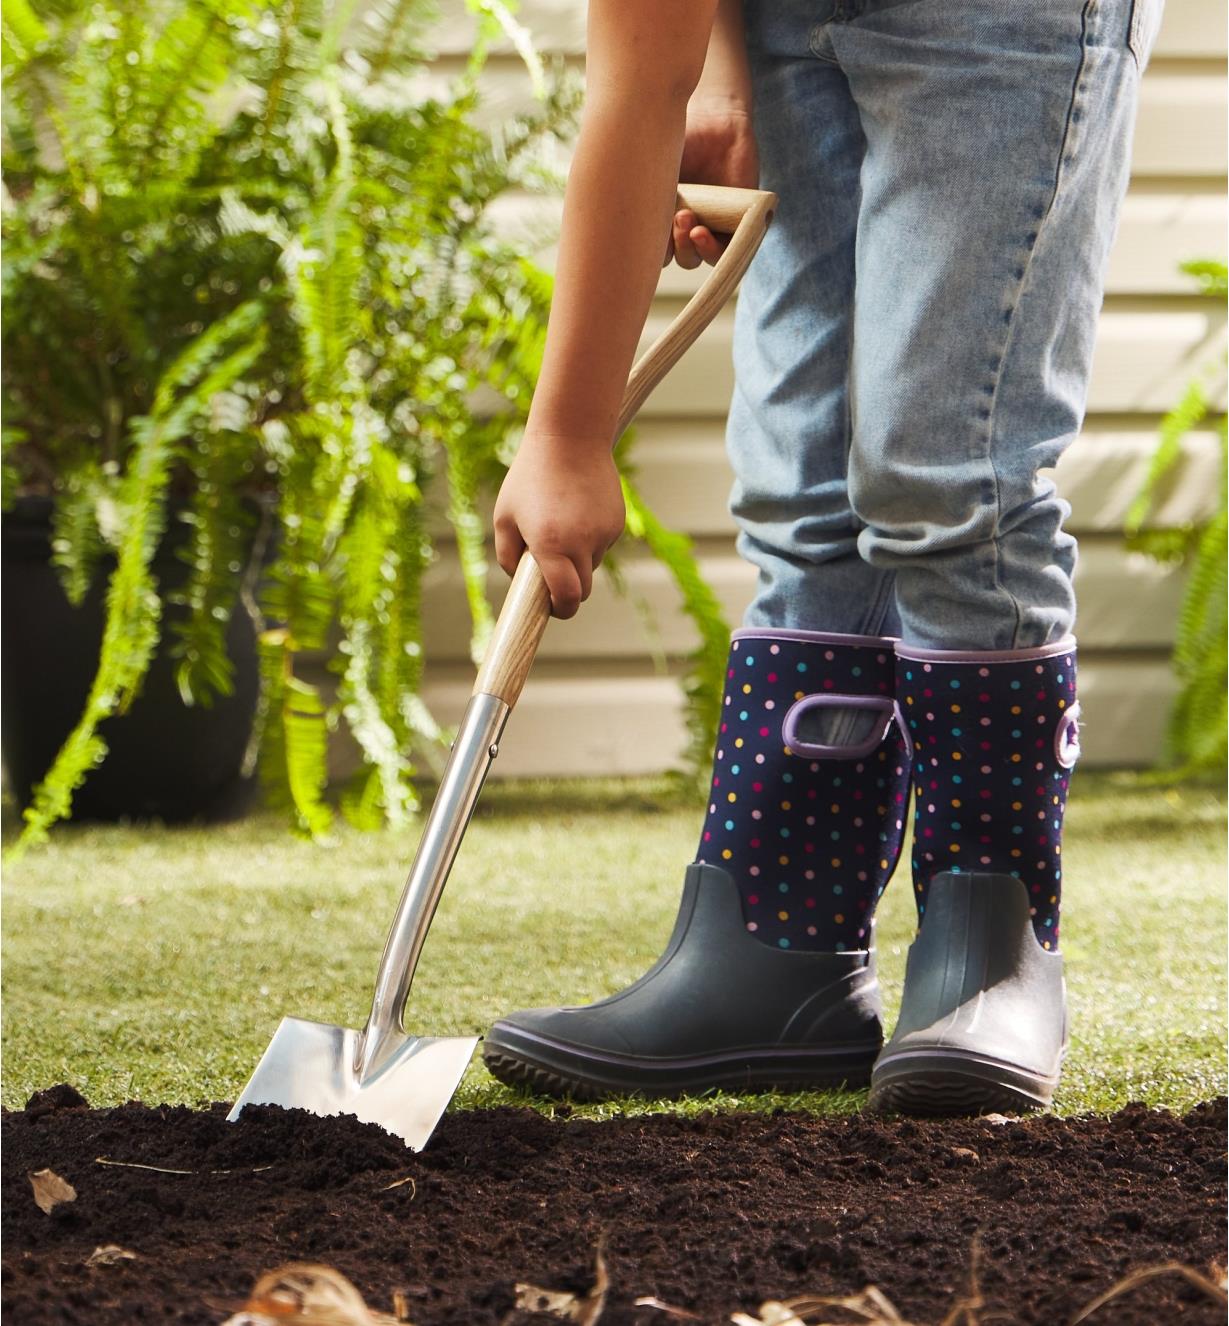 A child digs into soil with the children’s digging spade